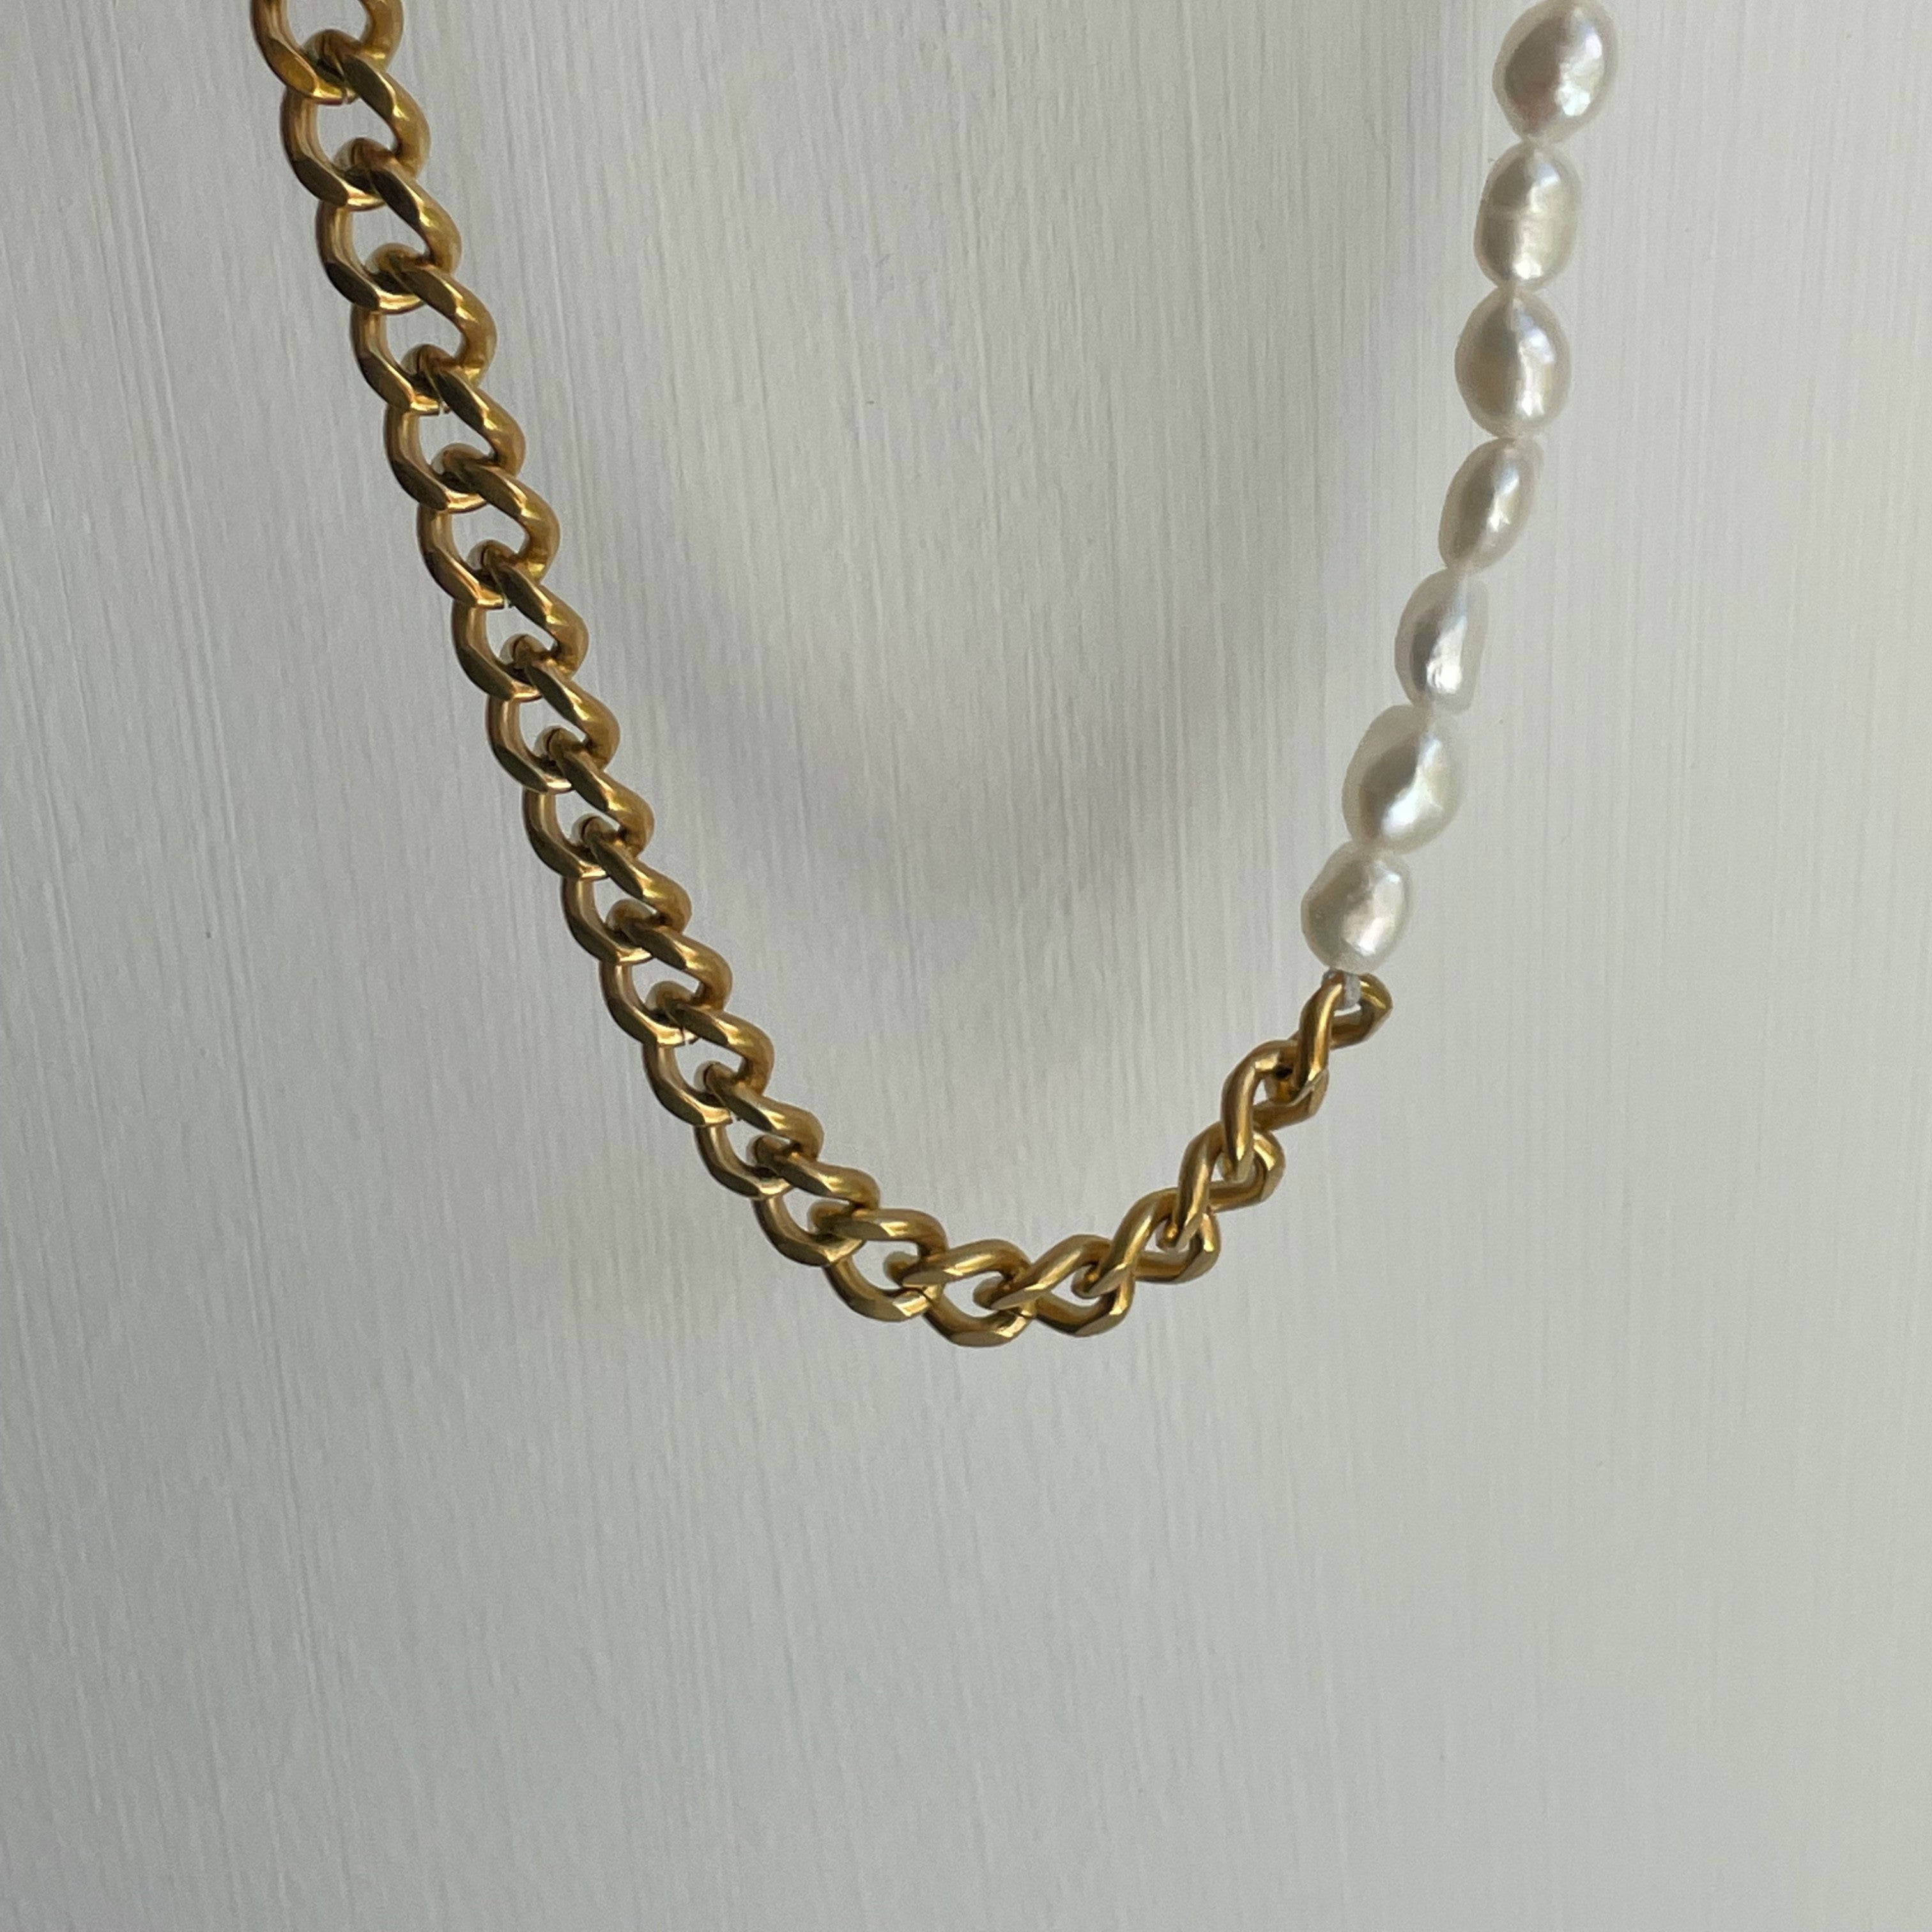 Chain Necklace with Pearls: Elevate your outfit with this sophisticated accessory